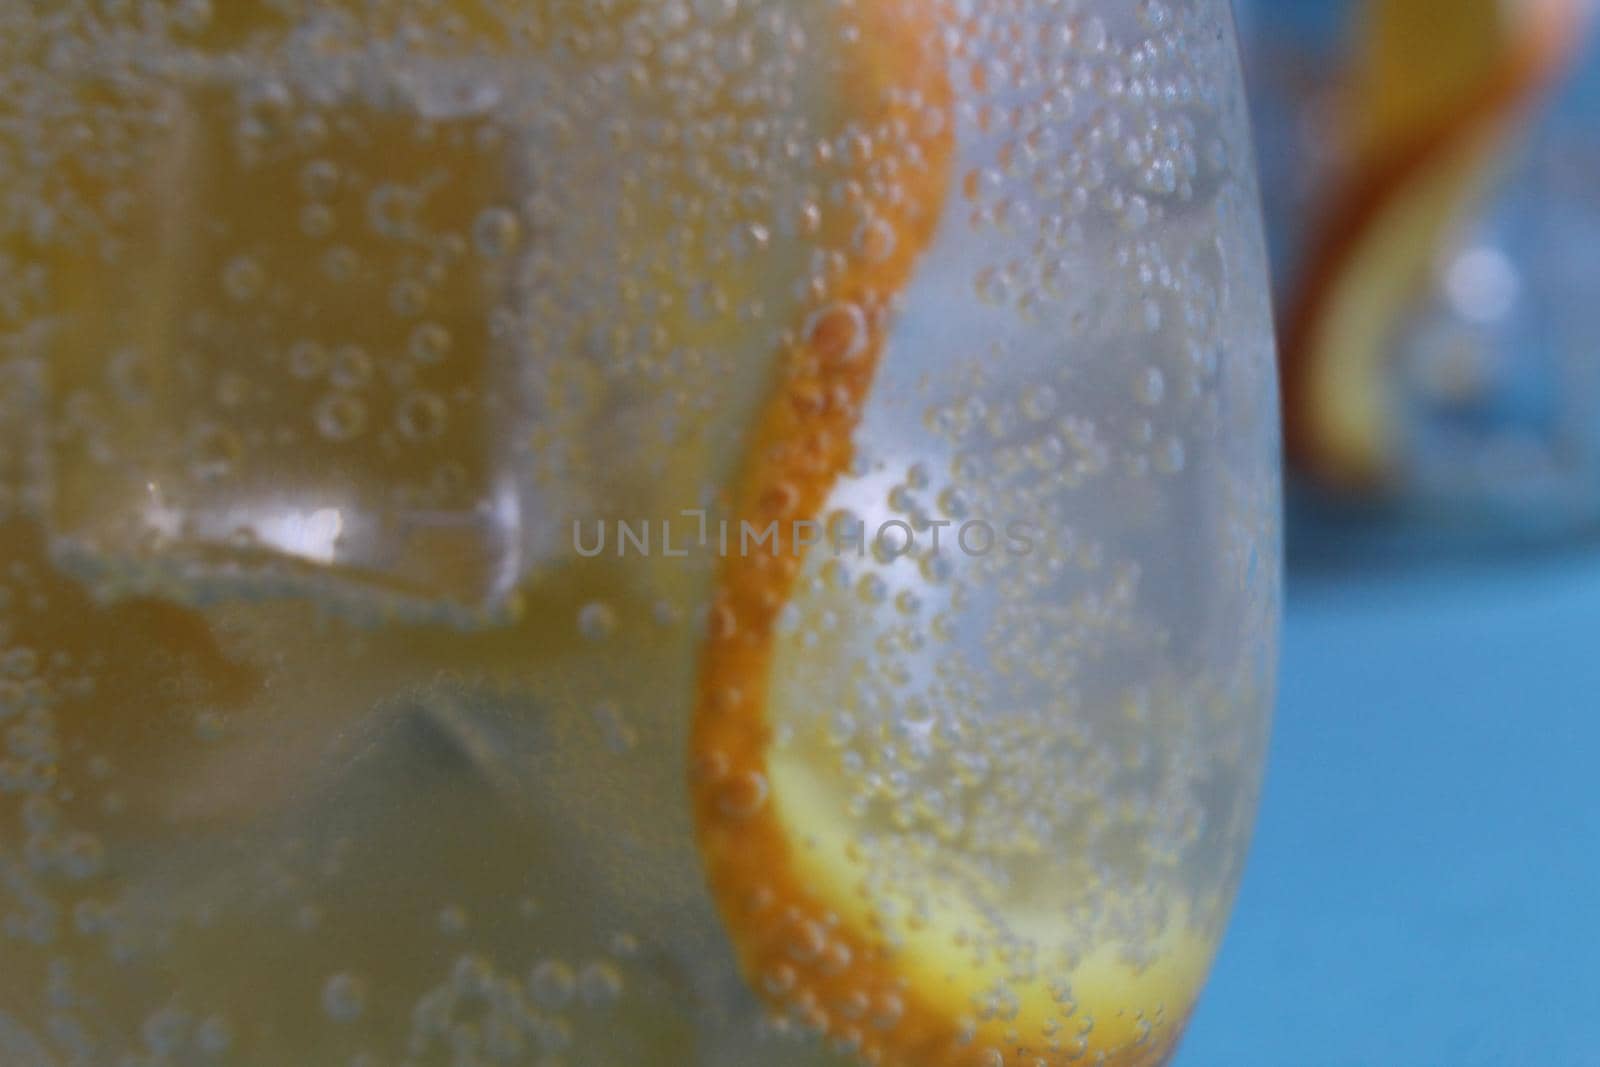 Lemonade water divorcing in a glass of ice and orange is very close-up. Macrophoto.